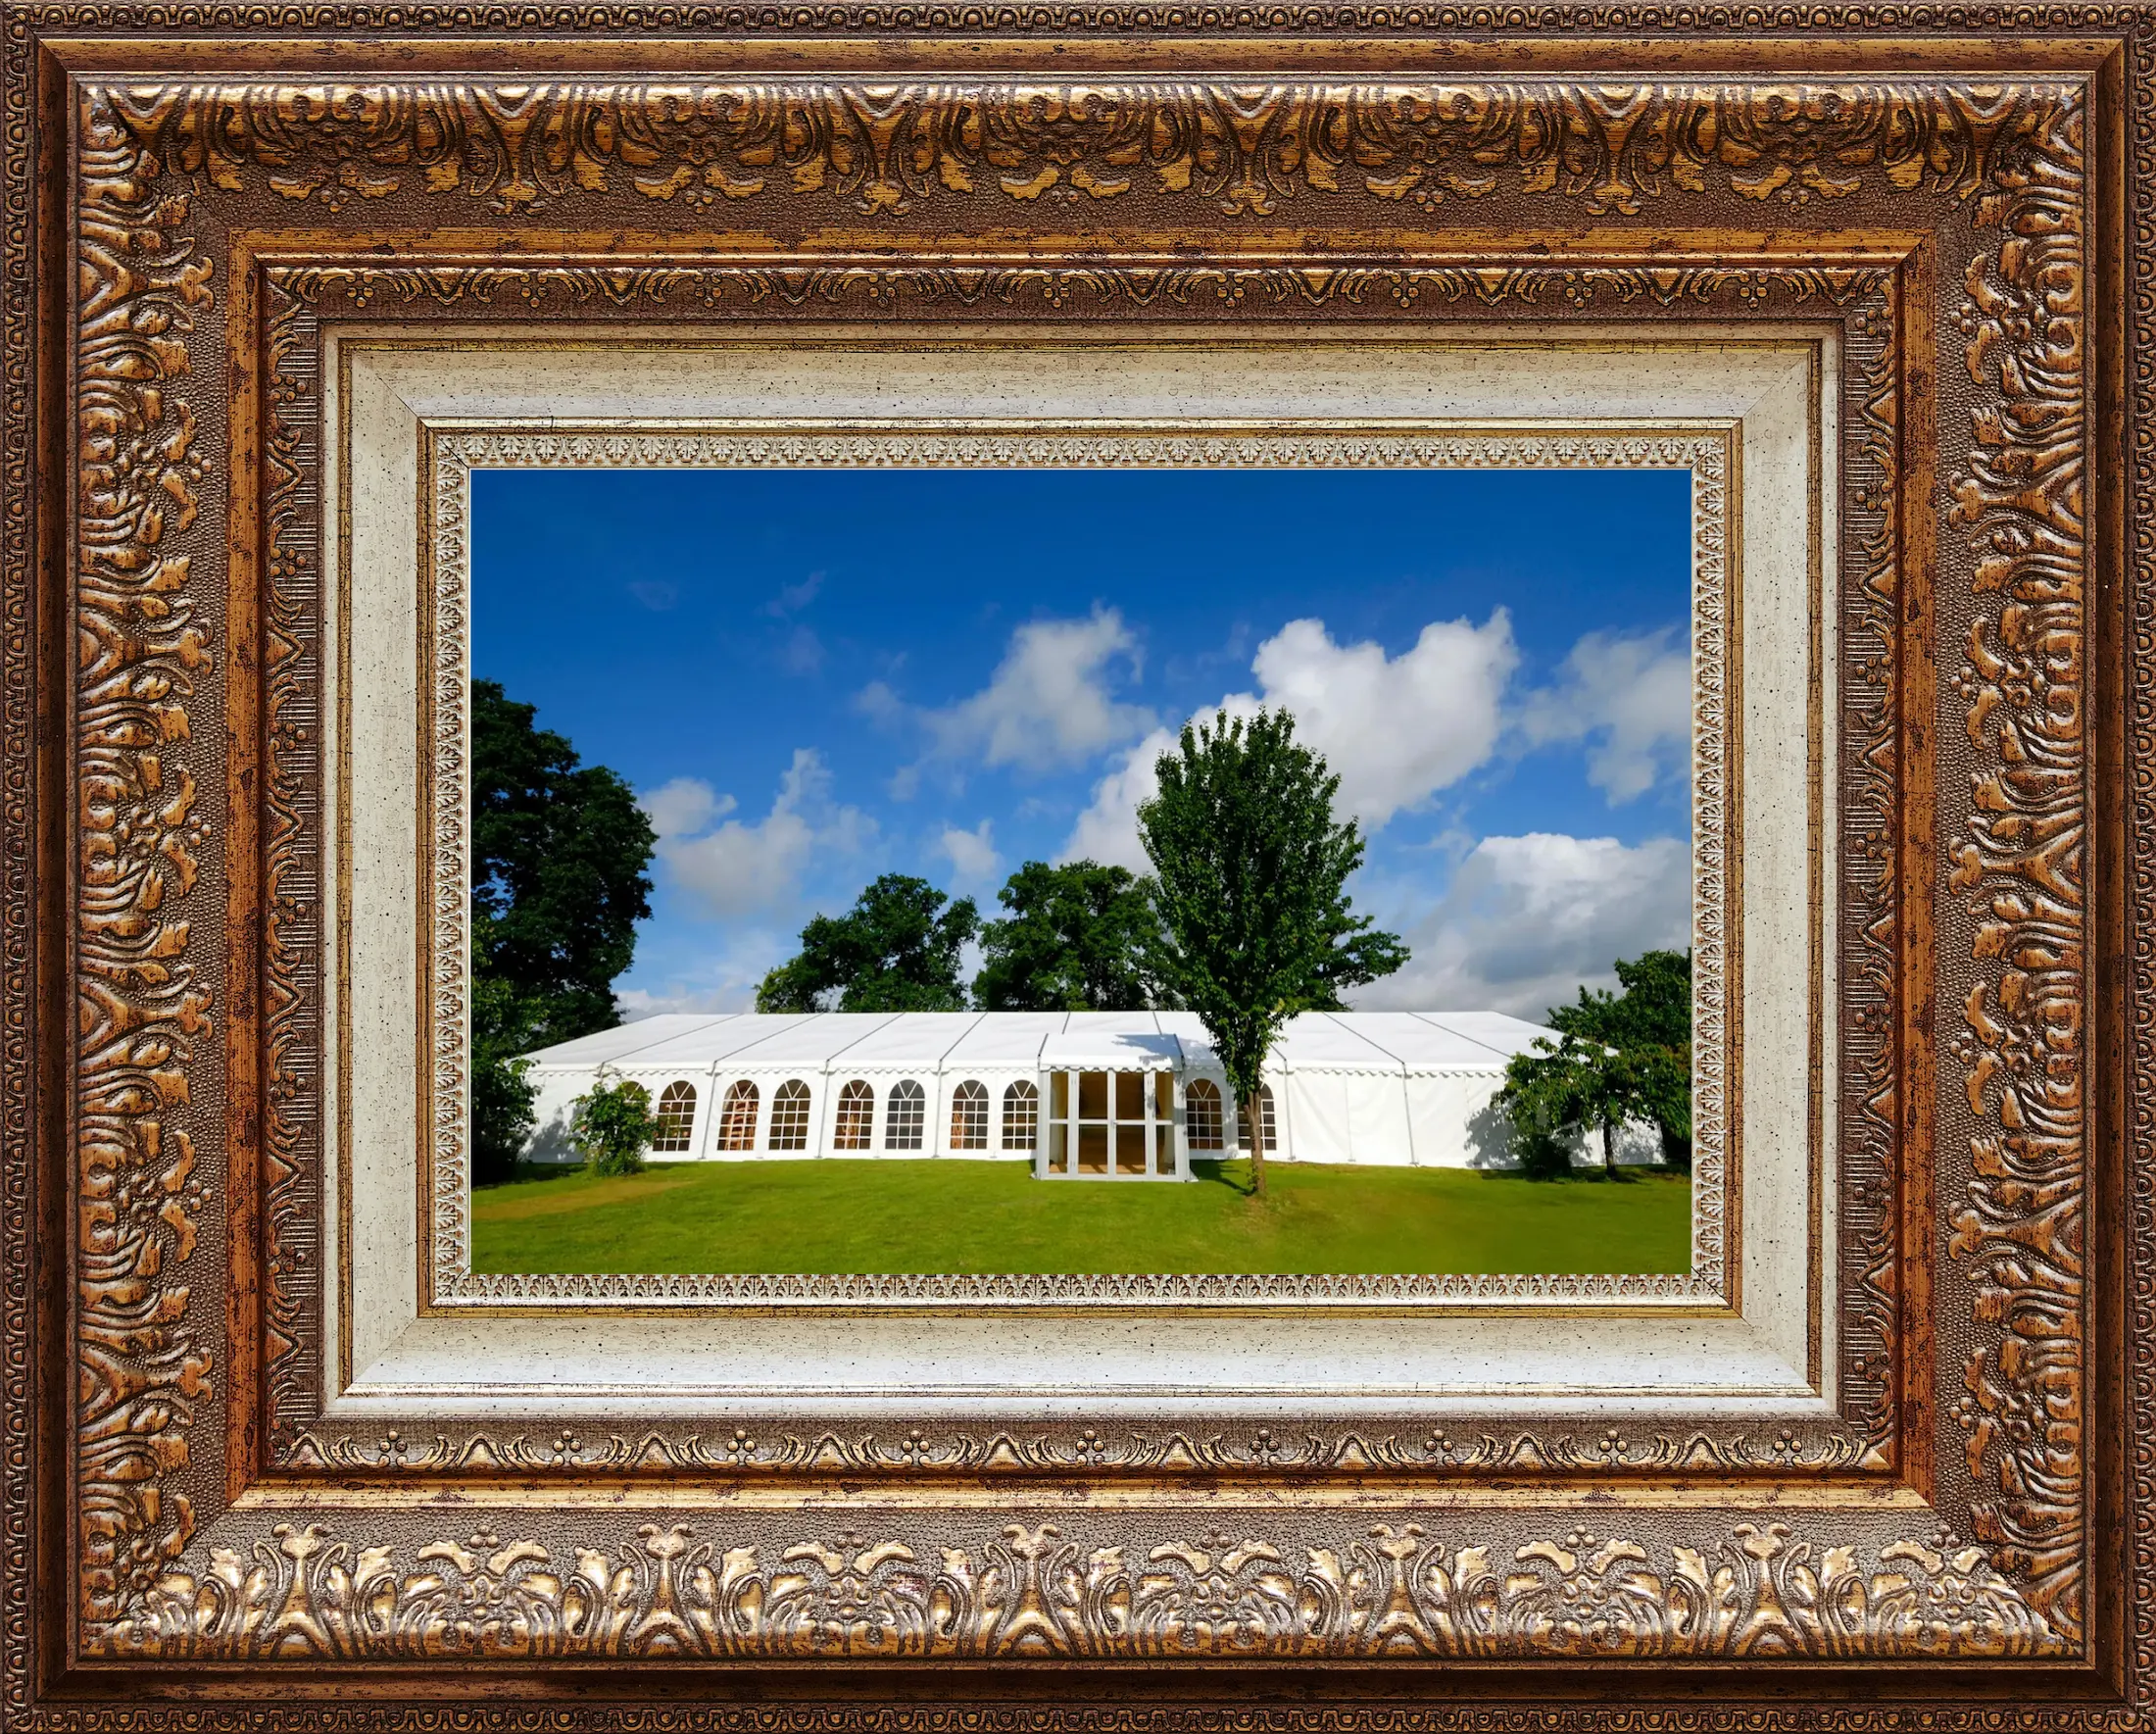 External view of a large marquee